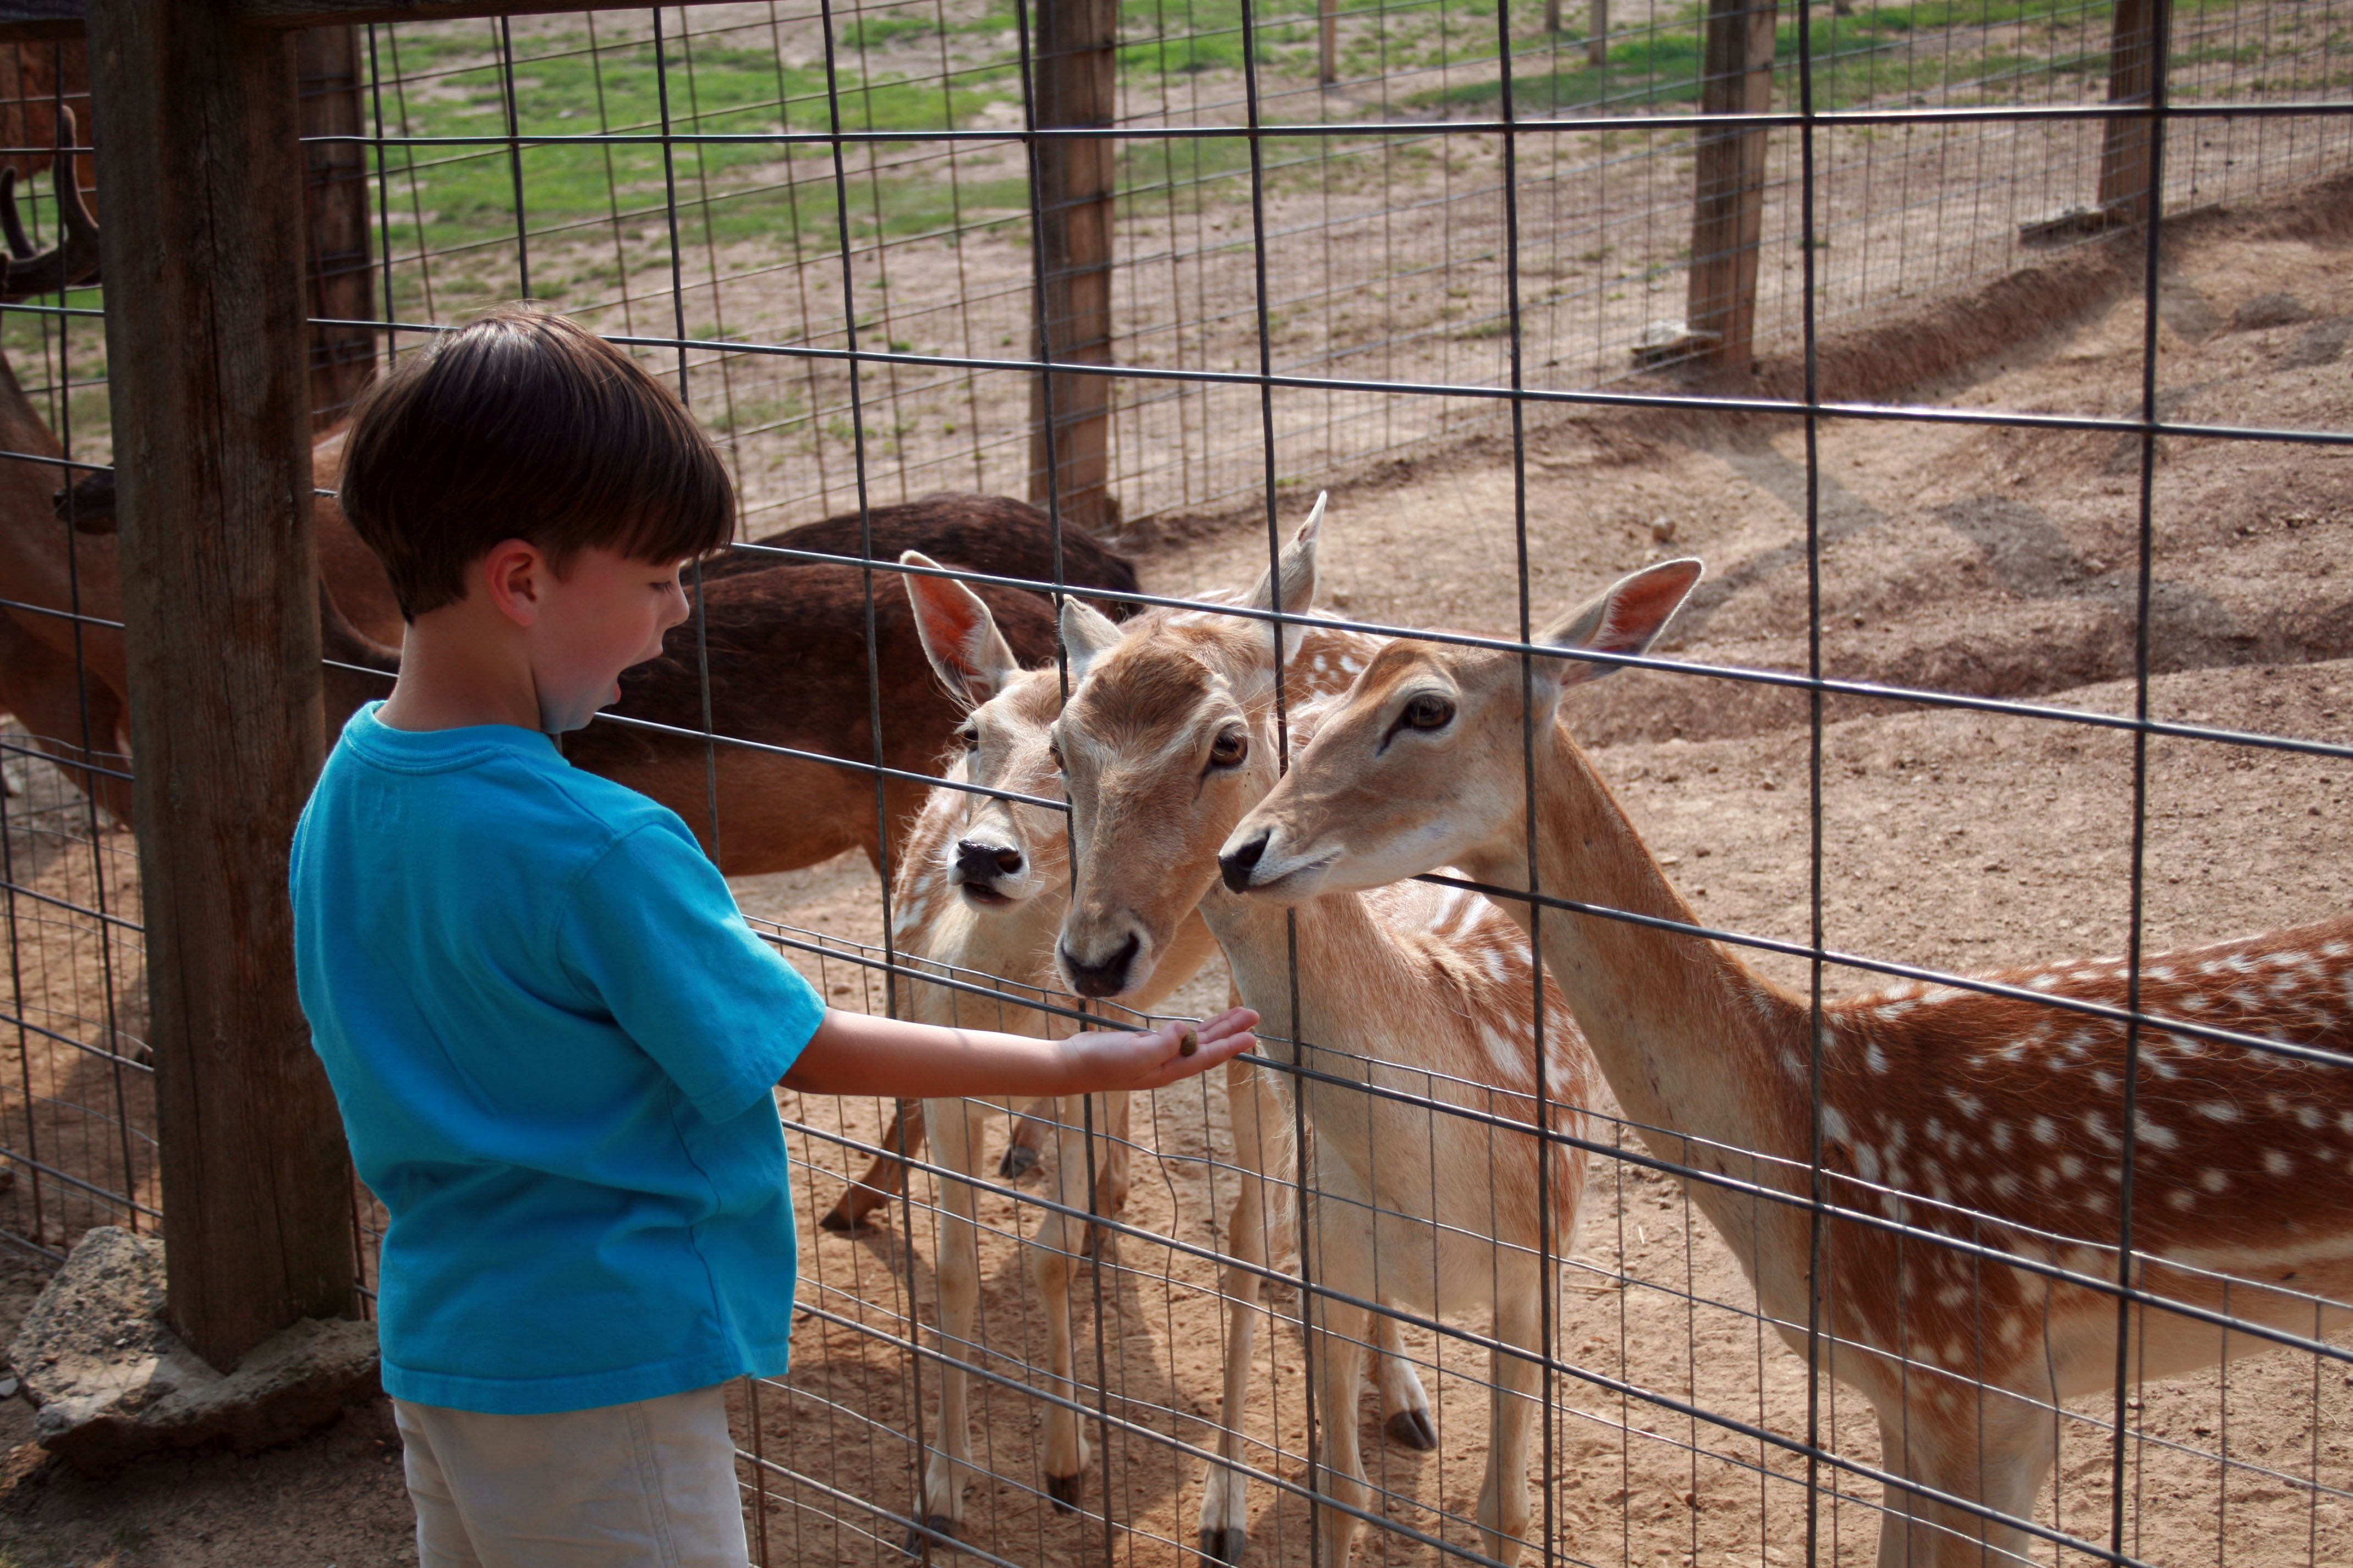 ALL YOU NEED TO KNOW ABOUT THE LITTLE PONDEROSA ZOO IN CLINTON TN |  Clinton, Norris, Oak Ridge | Visit Anderson County TN | Anderson County